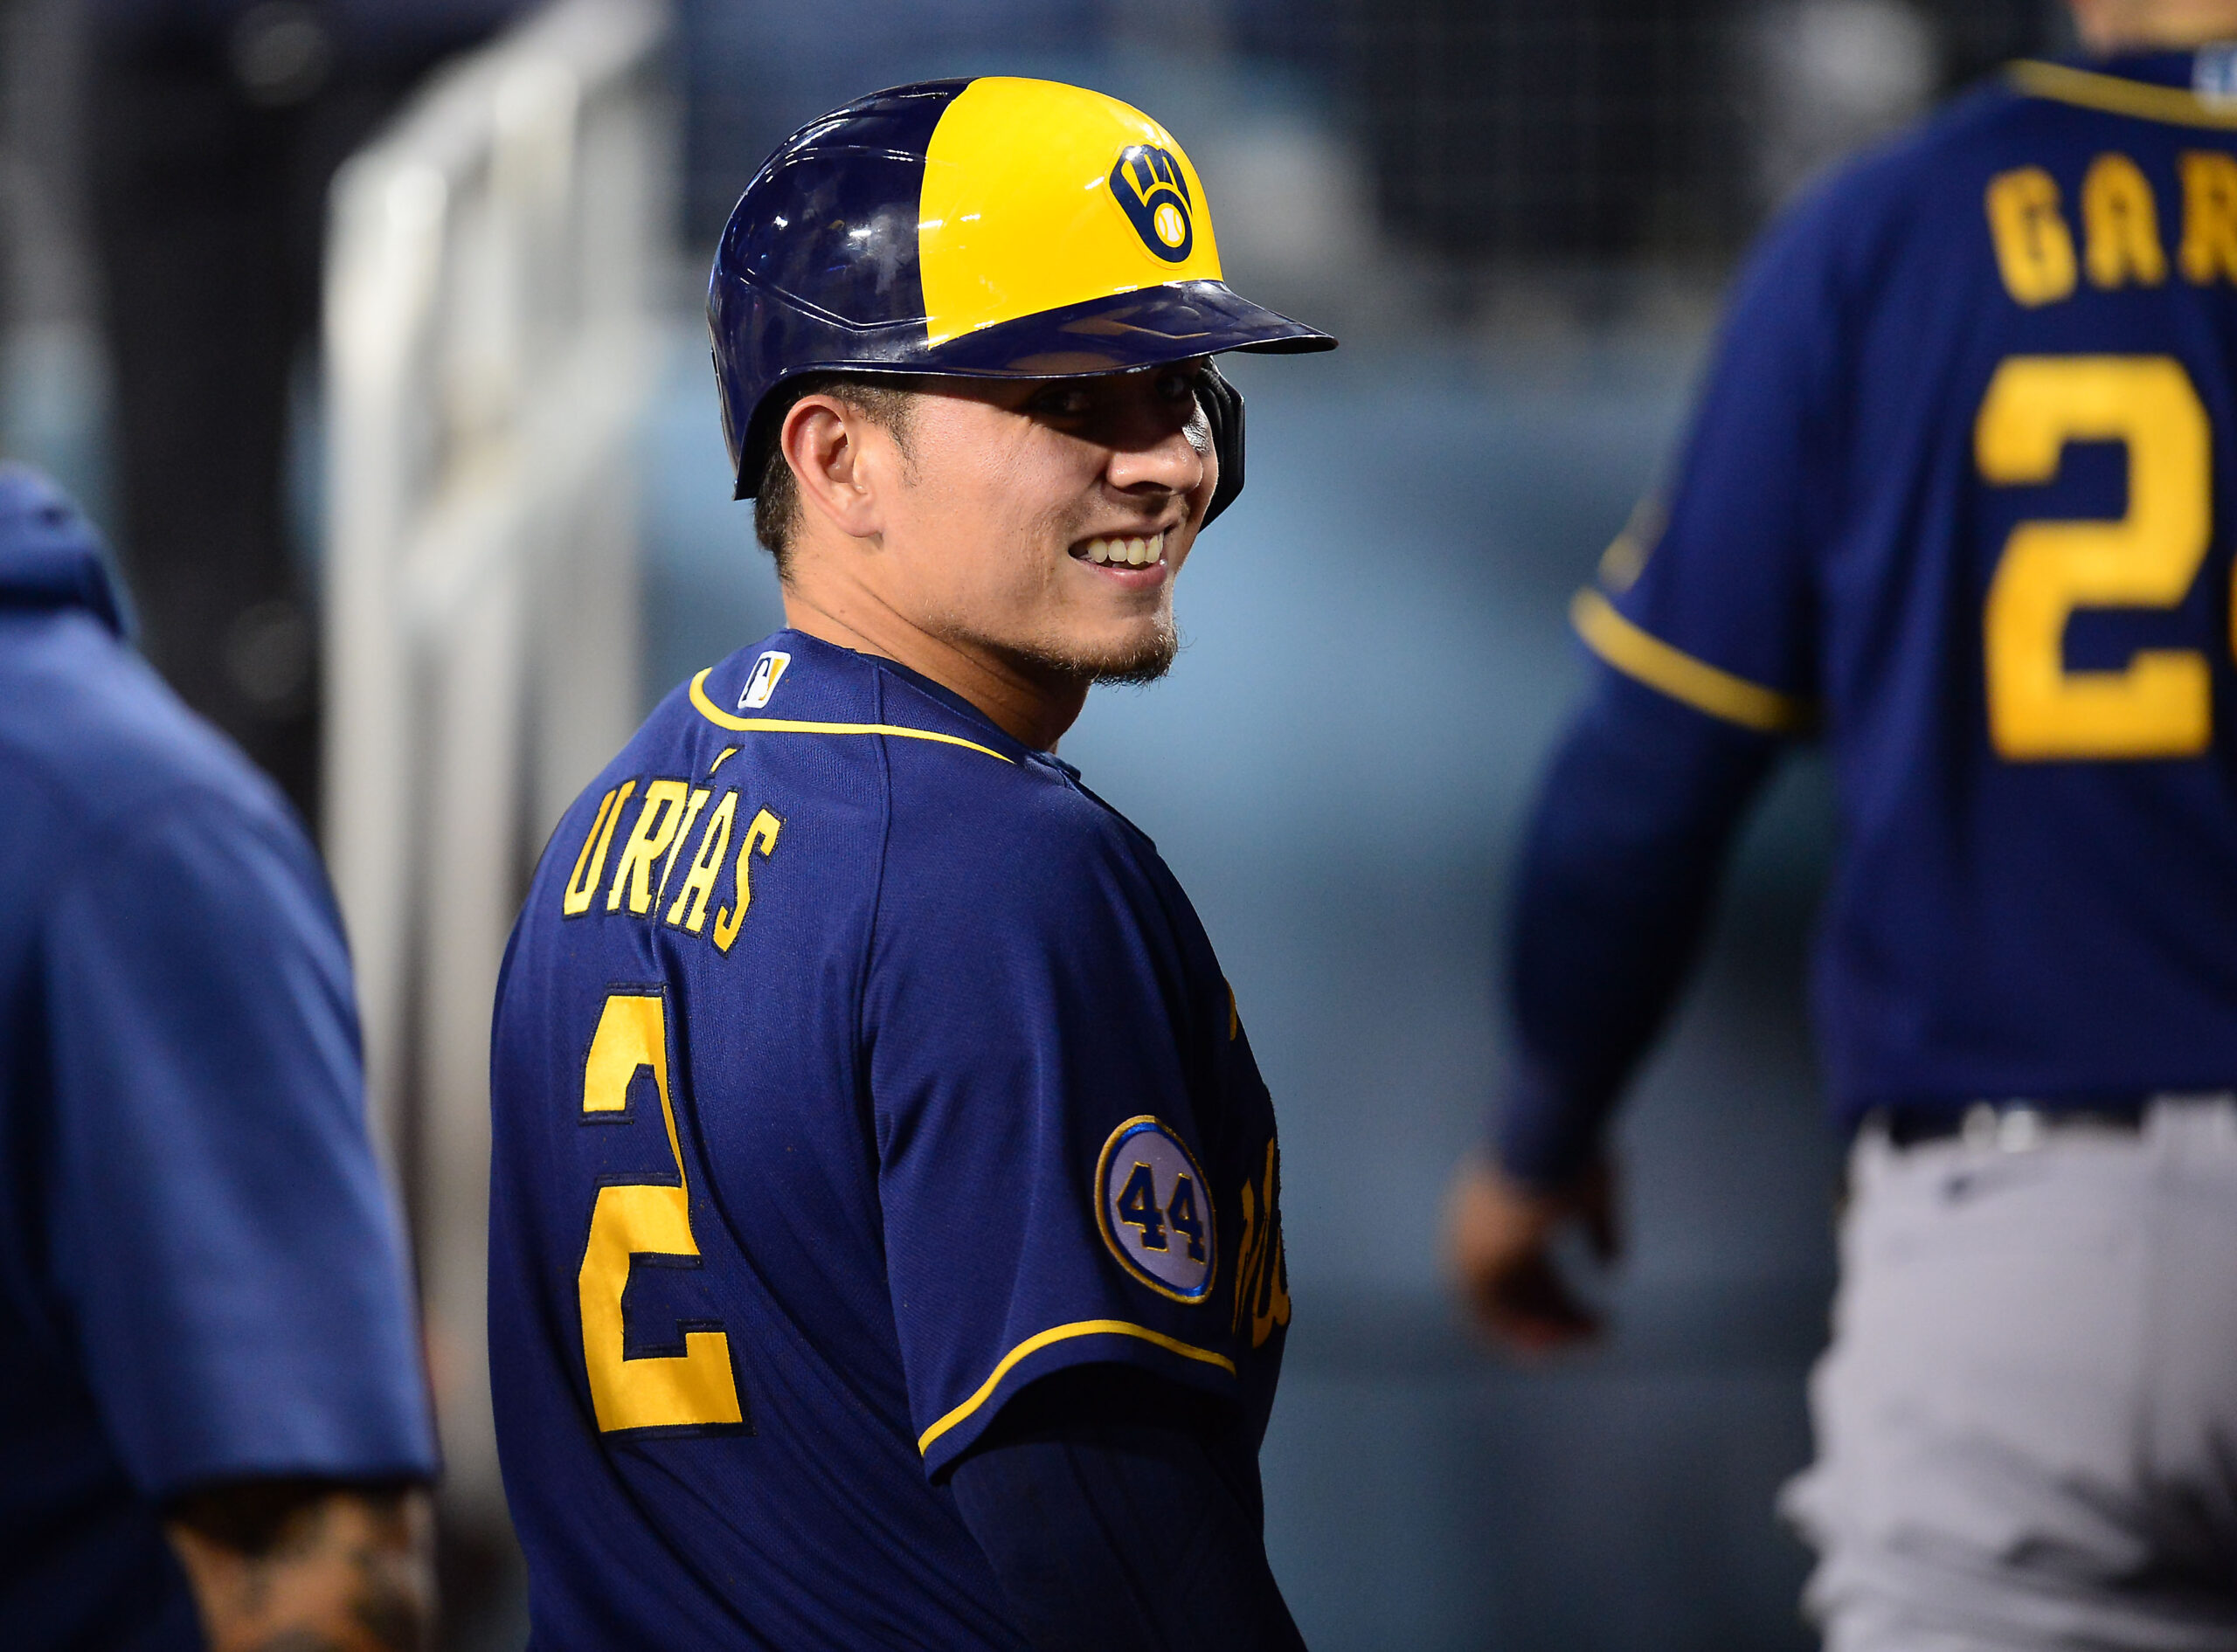 Luis Urias sent to Red Sox in last-second deadline deal - Brew